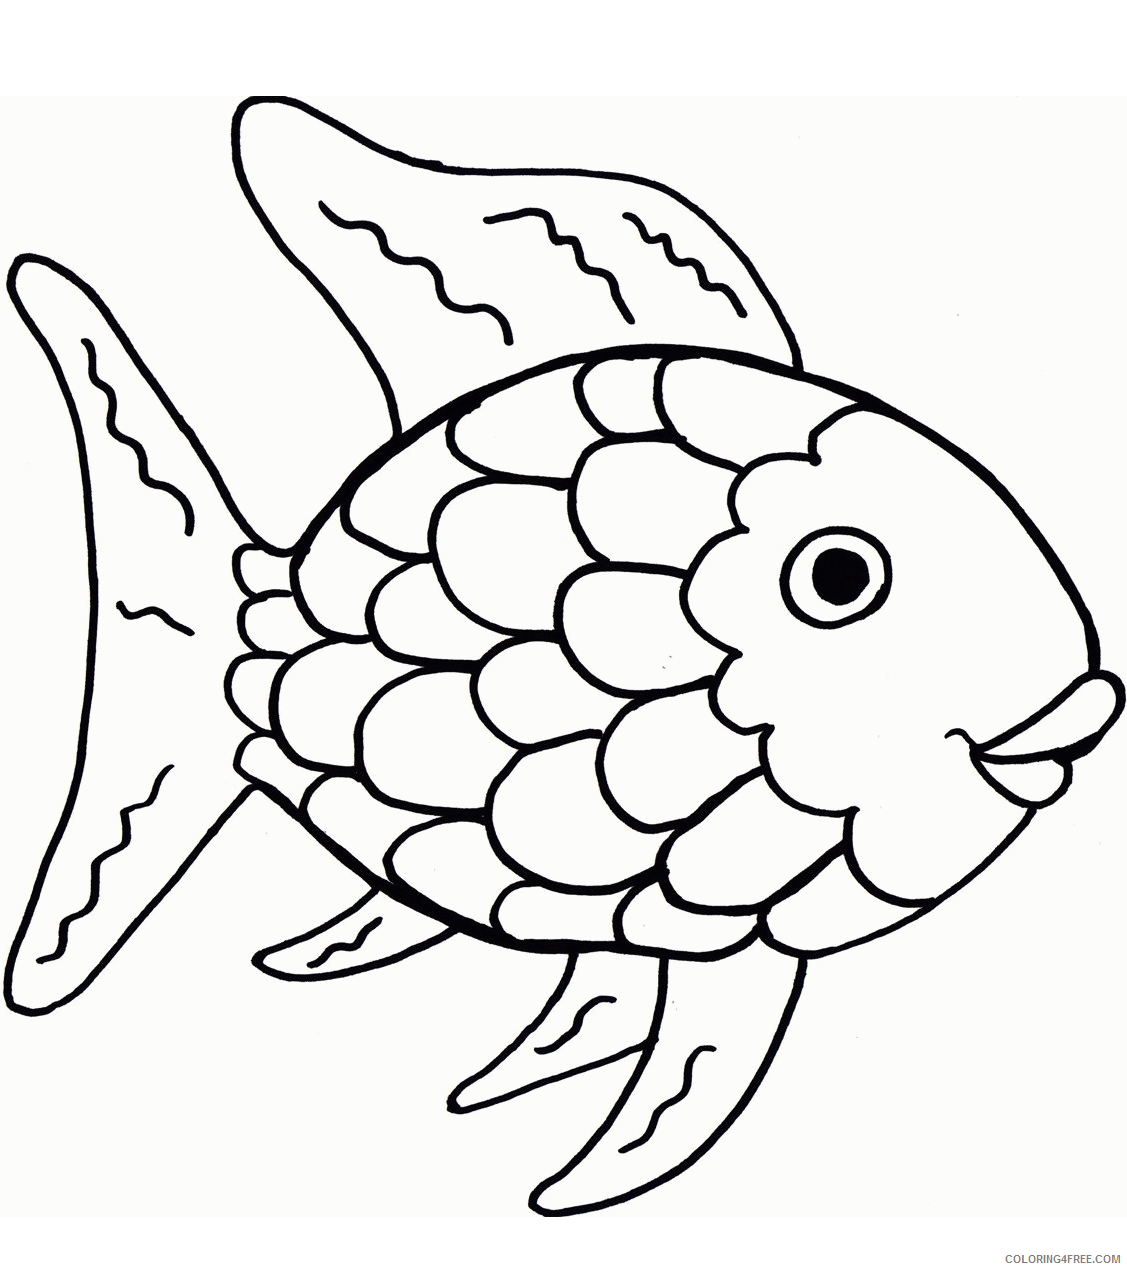 Rainbow Fish Coloring Pages Animal Printable Sheets the_rainbow_fish 2021 4230 Coloring4free